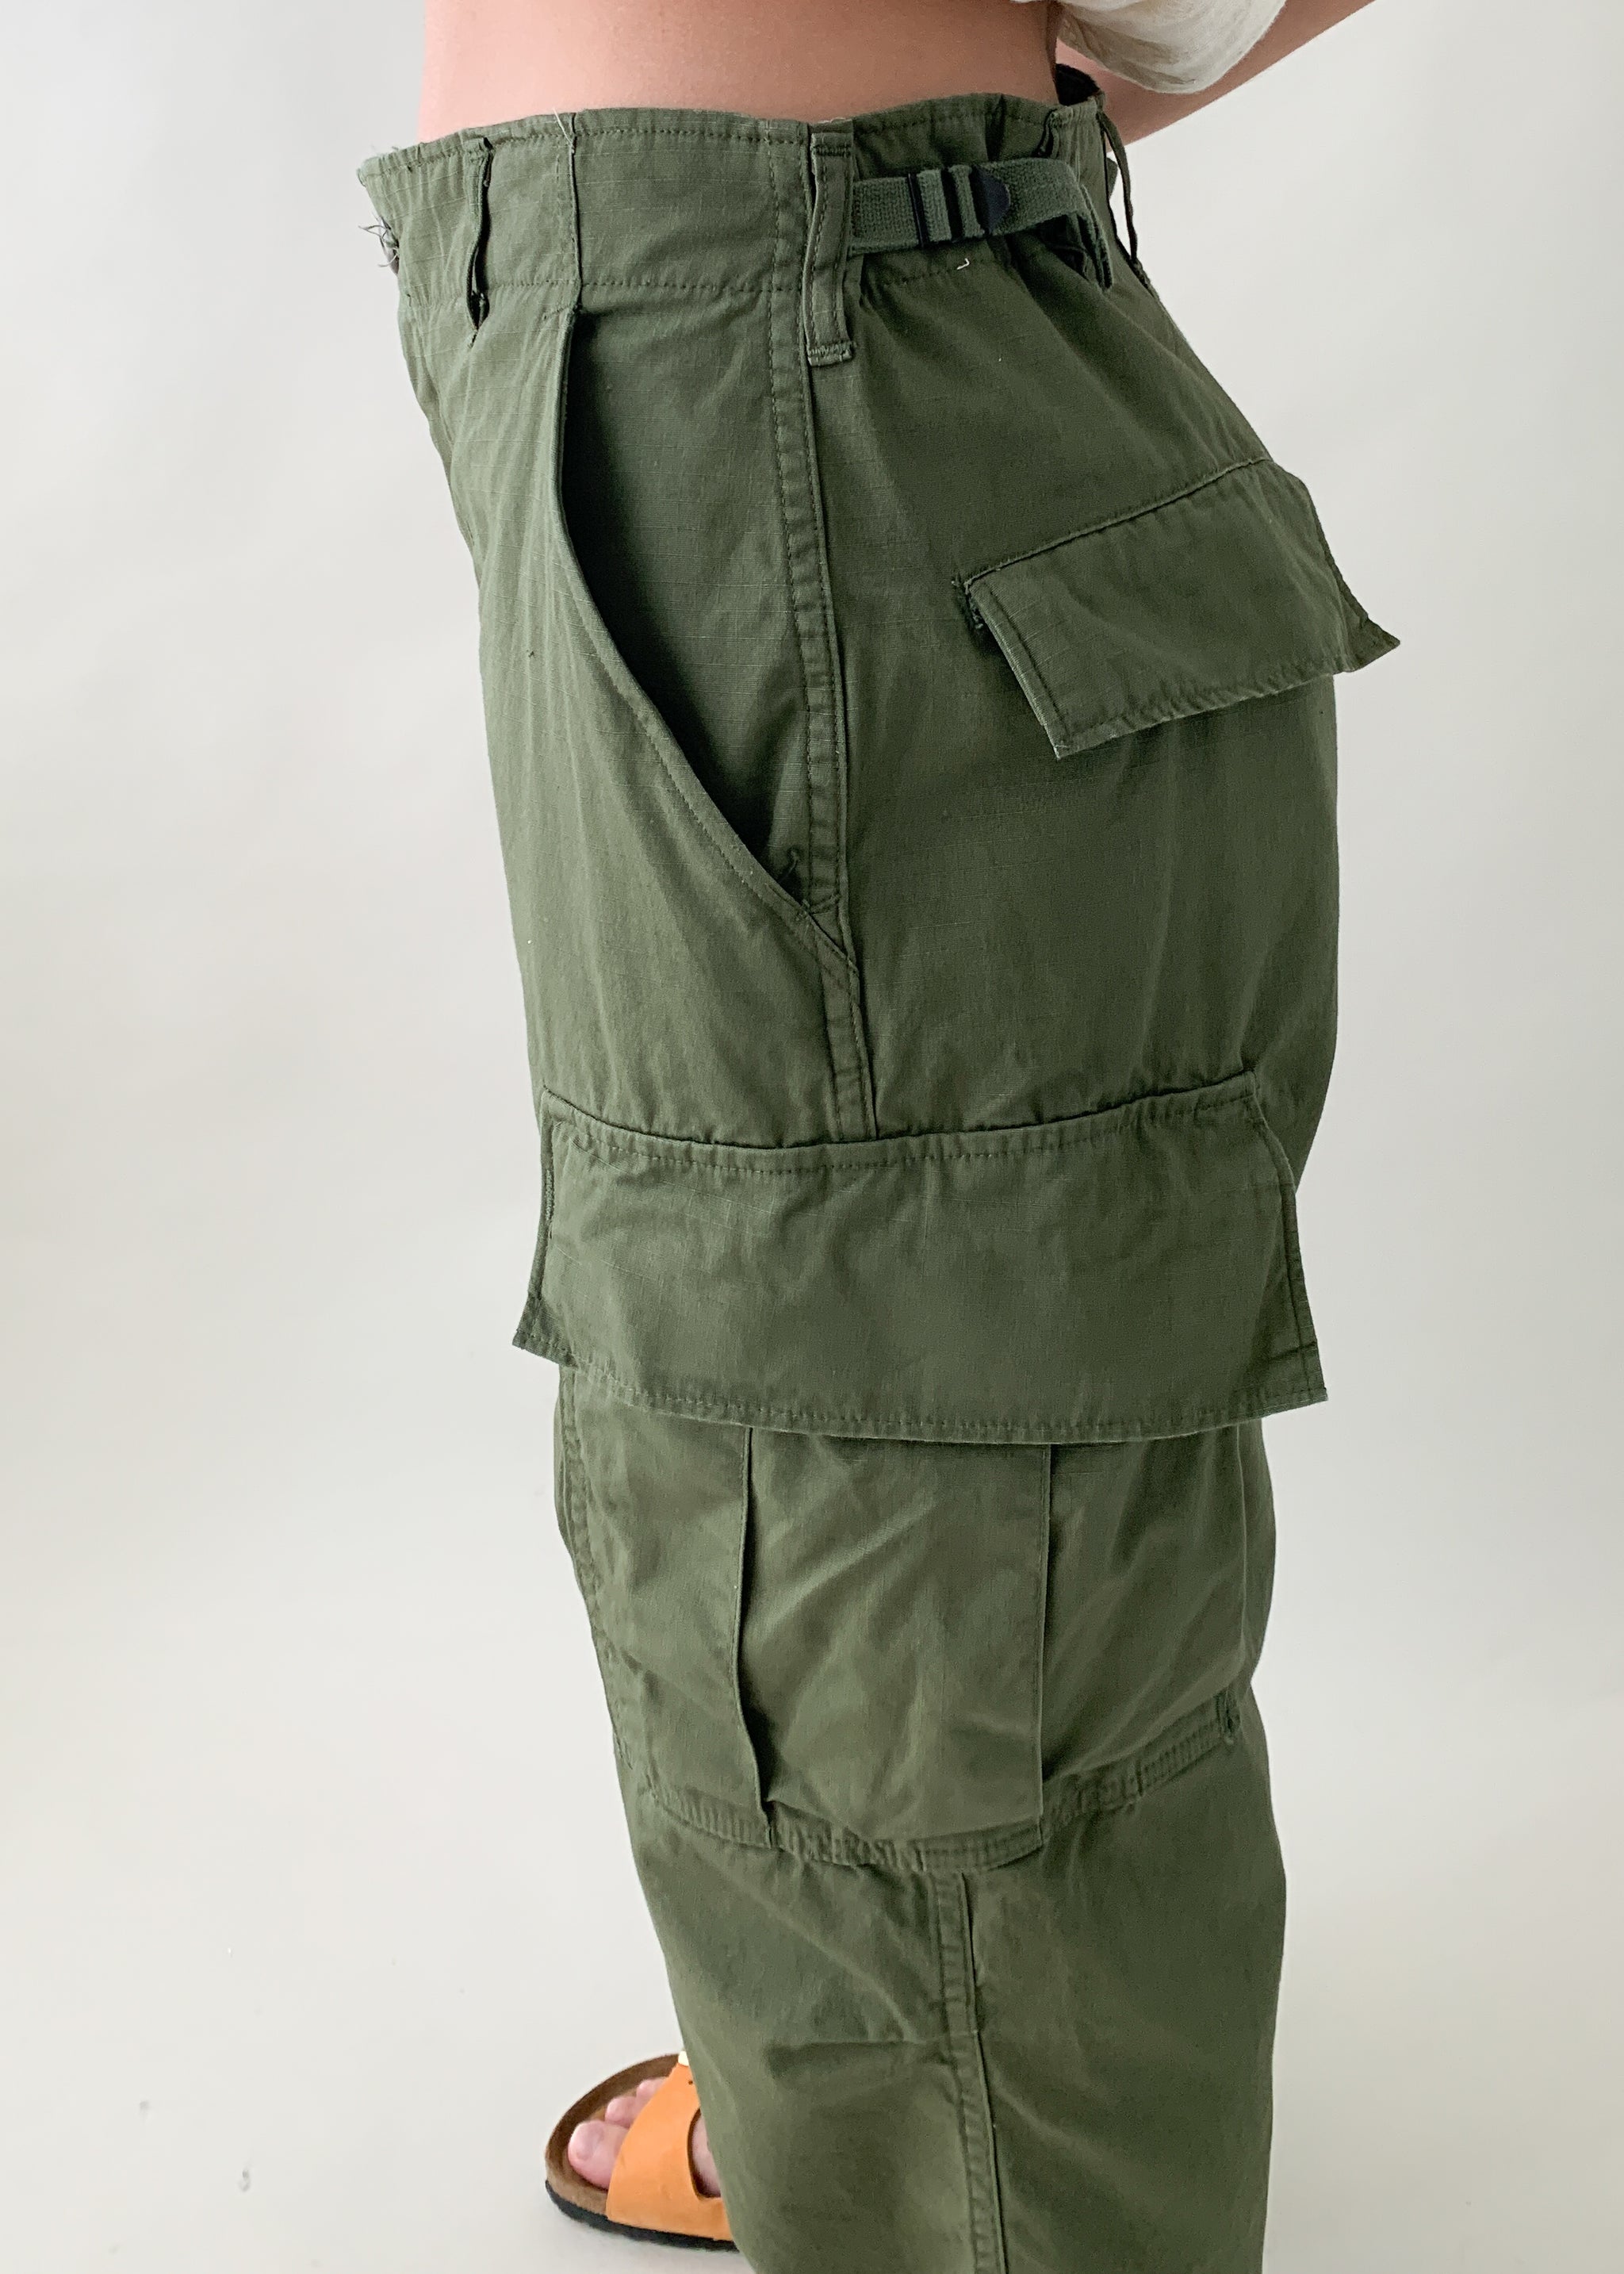 Army Cargo Pants For Boys